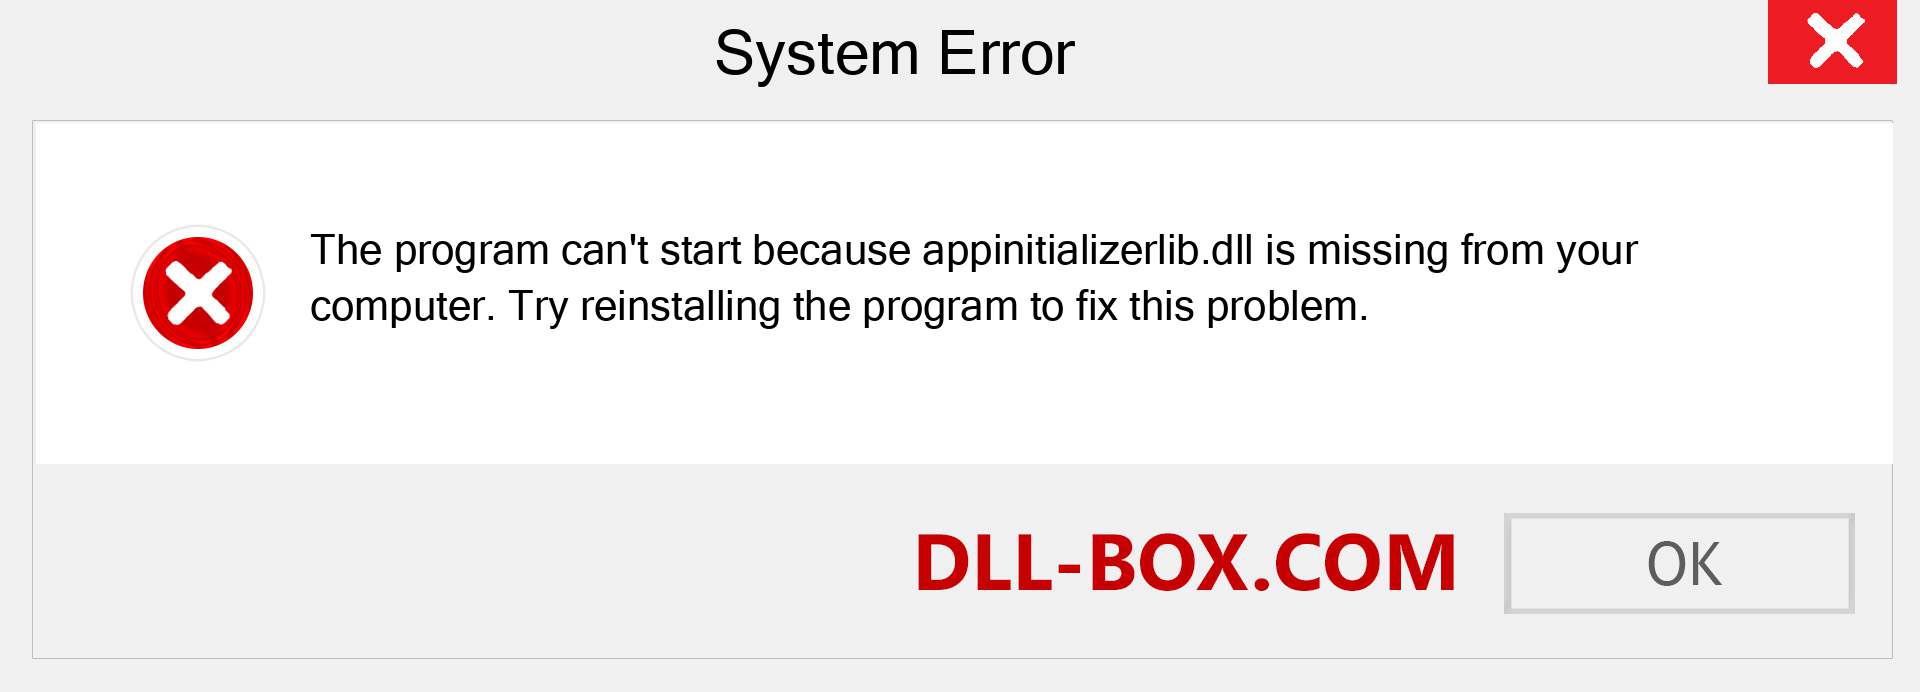  appinitializerlib.dll file is missing?. Download for Windows 7, 8, 10 - Fix  appinitializerlib dll Missing Error on Windows, photos, images